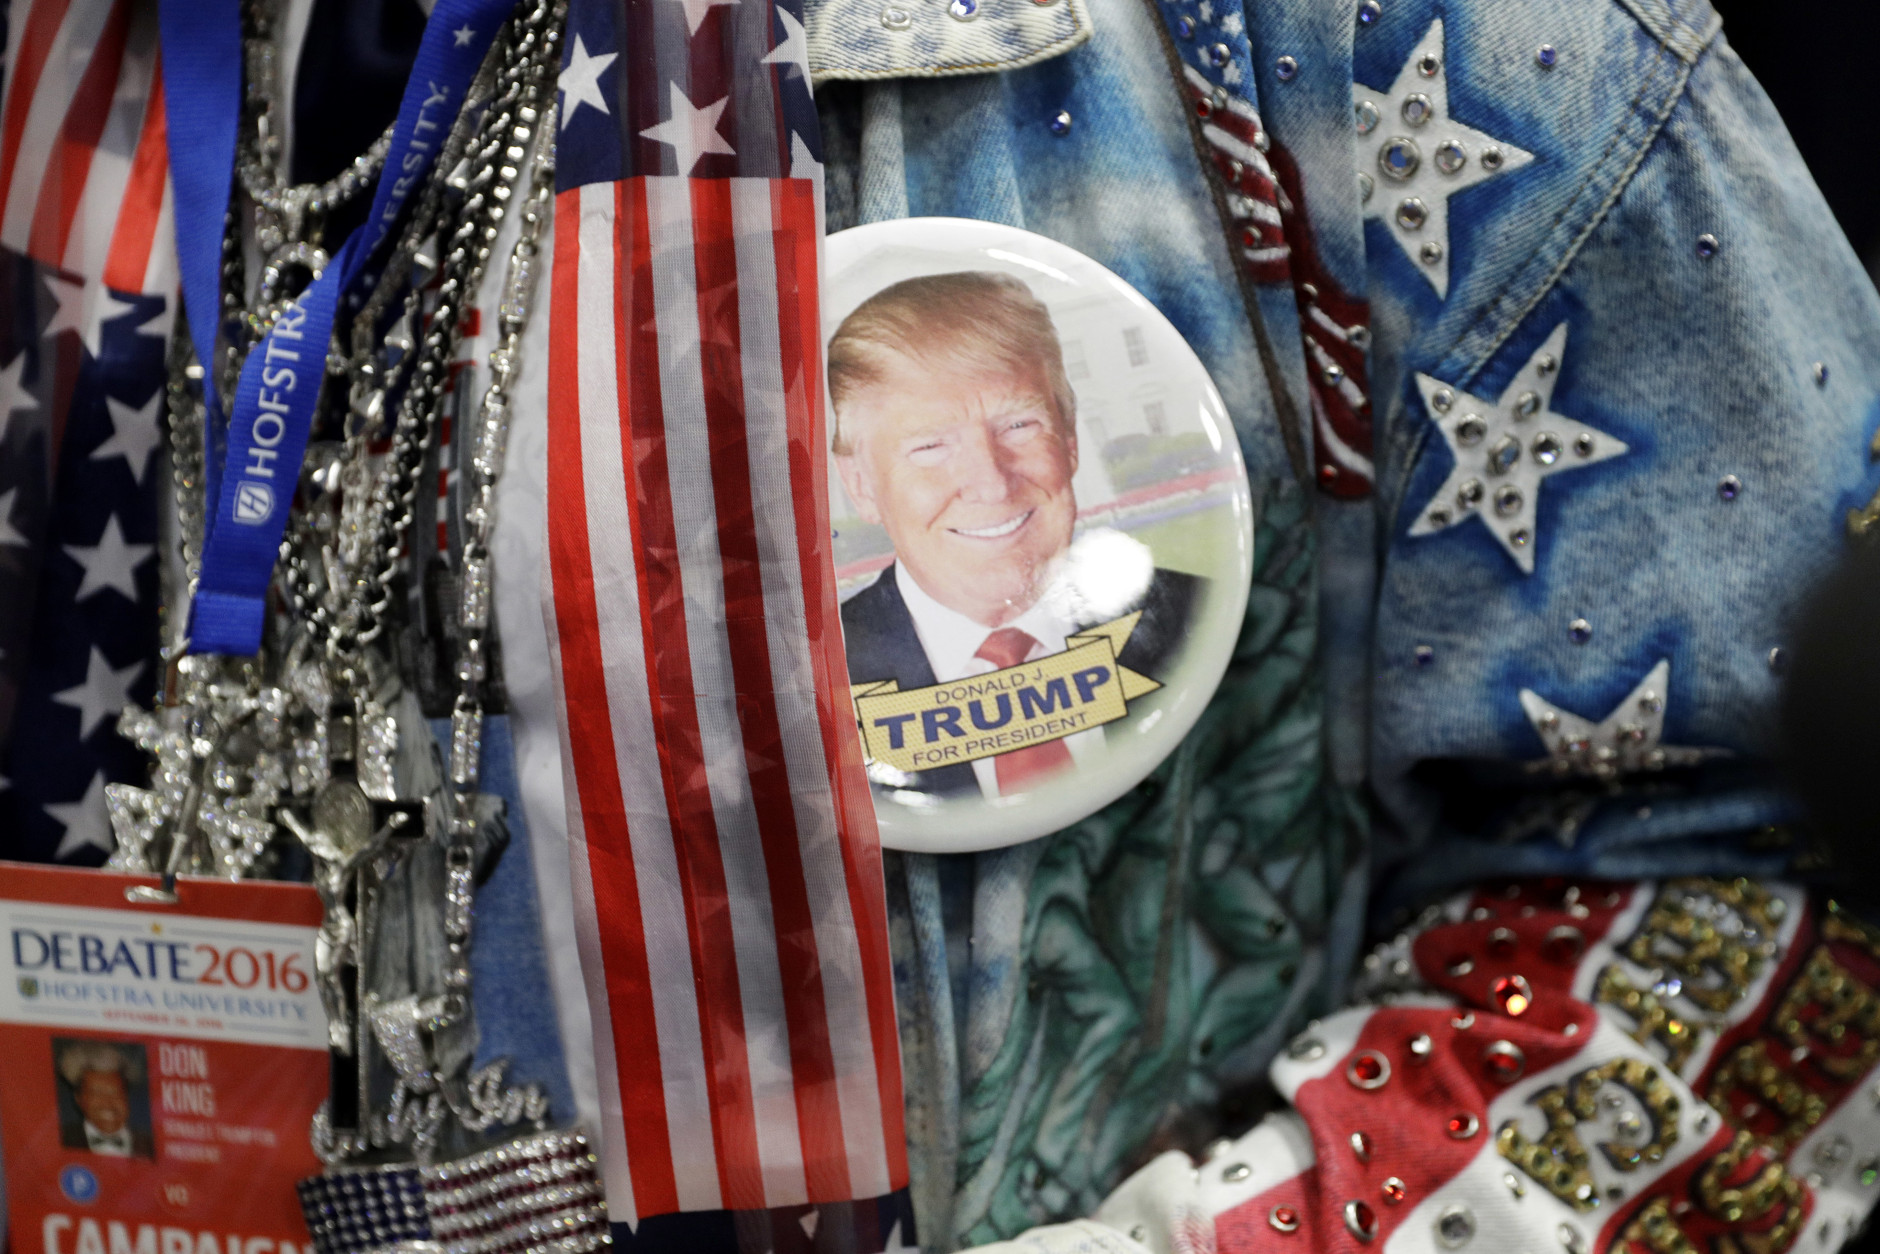 Boxing promoter Don King wears a button in support of Donald Trump before the presidential debate between Democratic presidential candidate Hillary Clinton and Republican presidential candidate Donald Trump at Hofstra University in Hempstead, N.Y., Monday, Sept. 26, 2016. (AP Photo/John Locher)